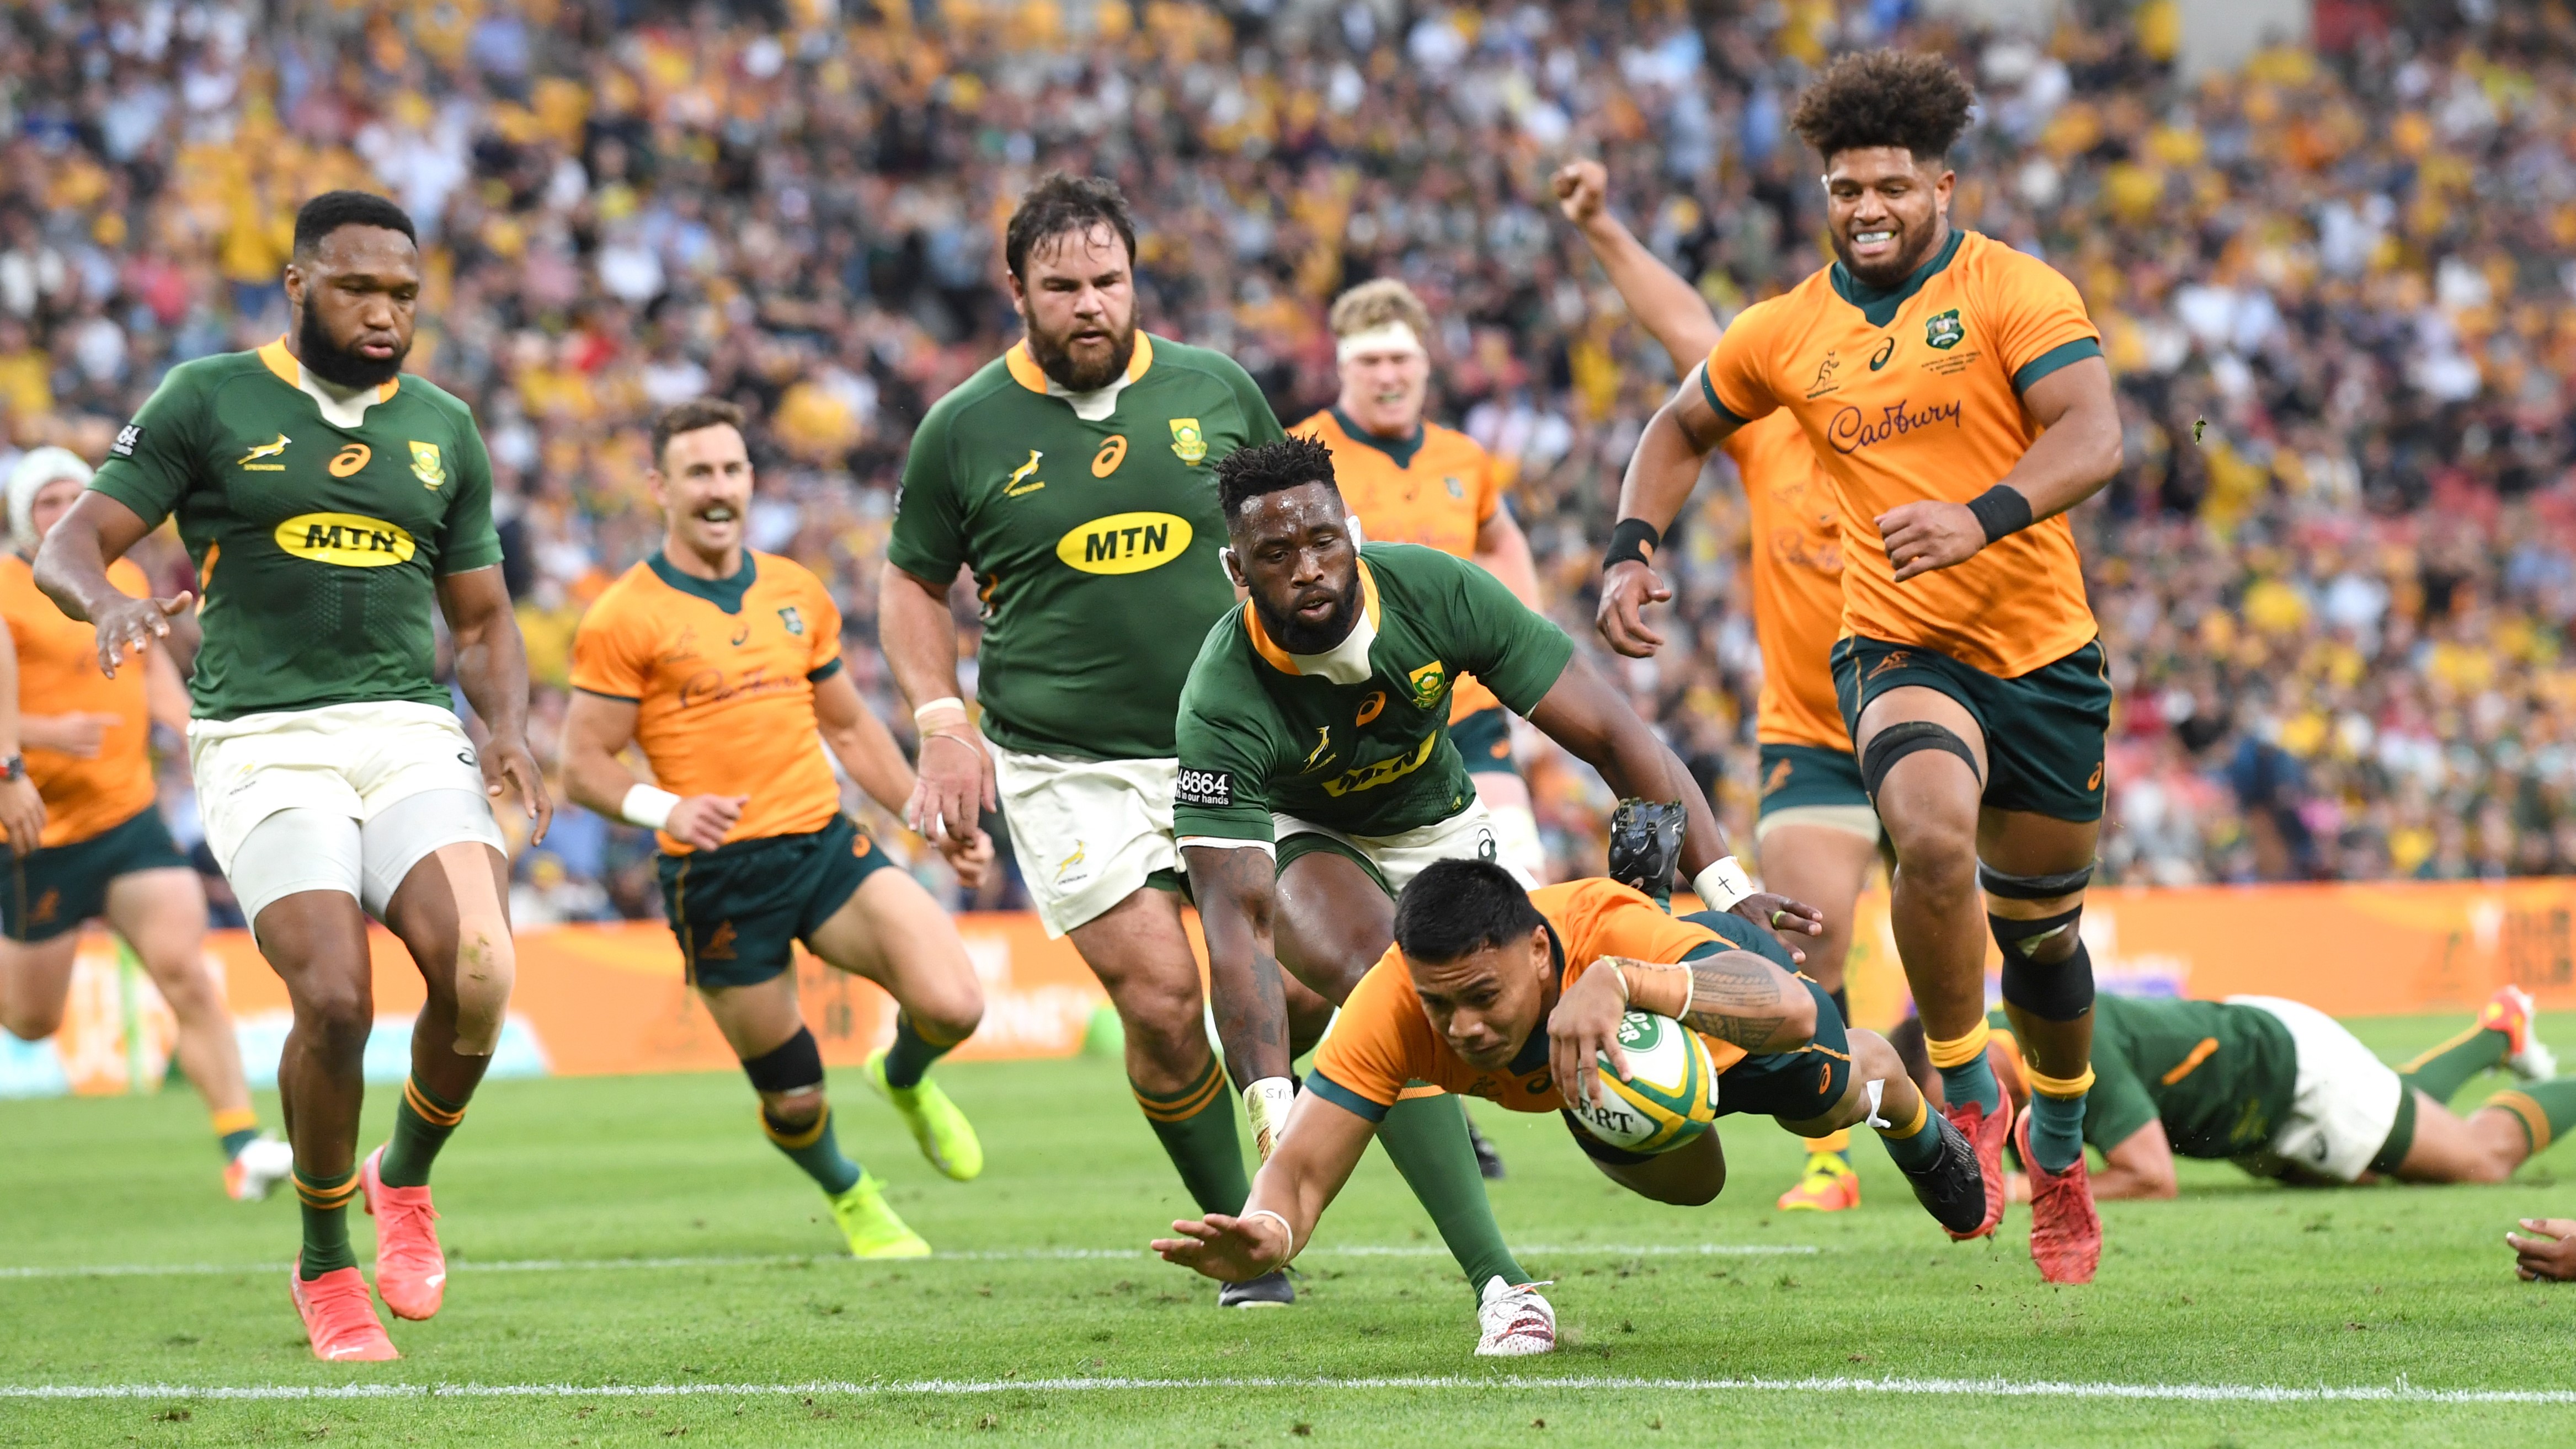 2021 Rugby Championship - Australia vs South Africa